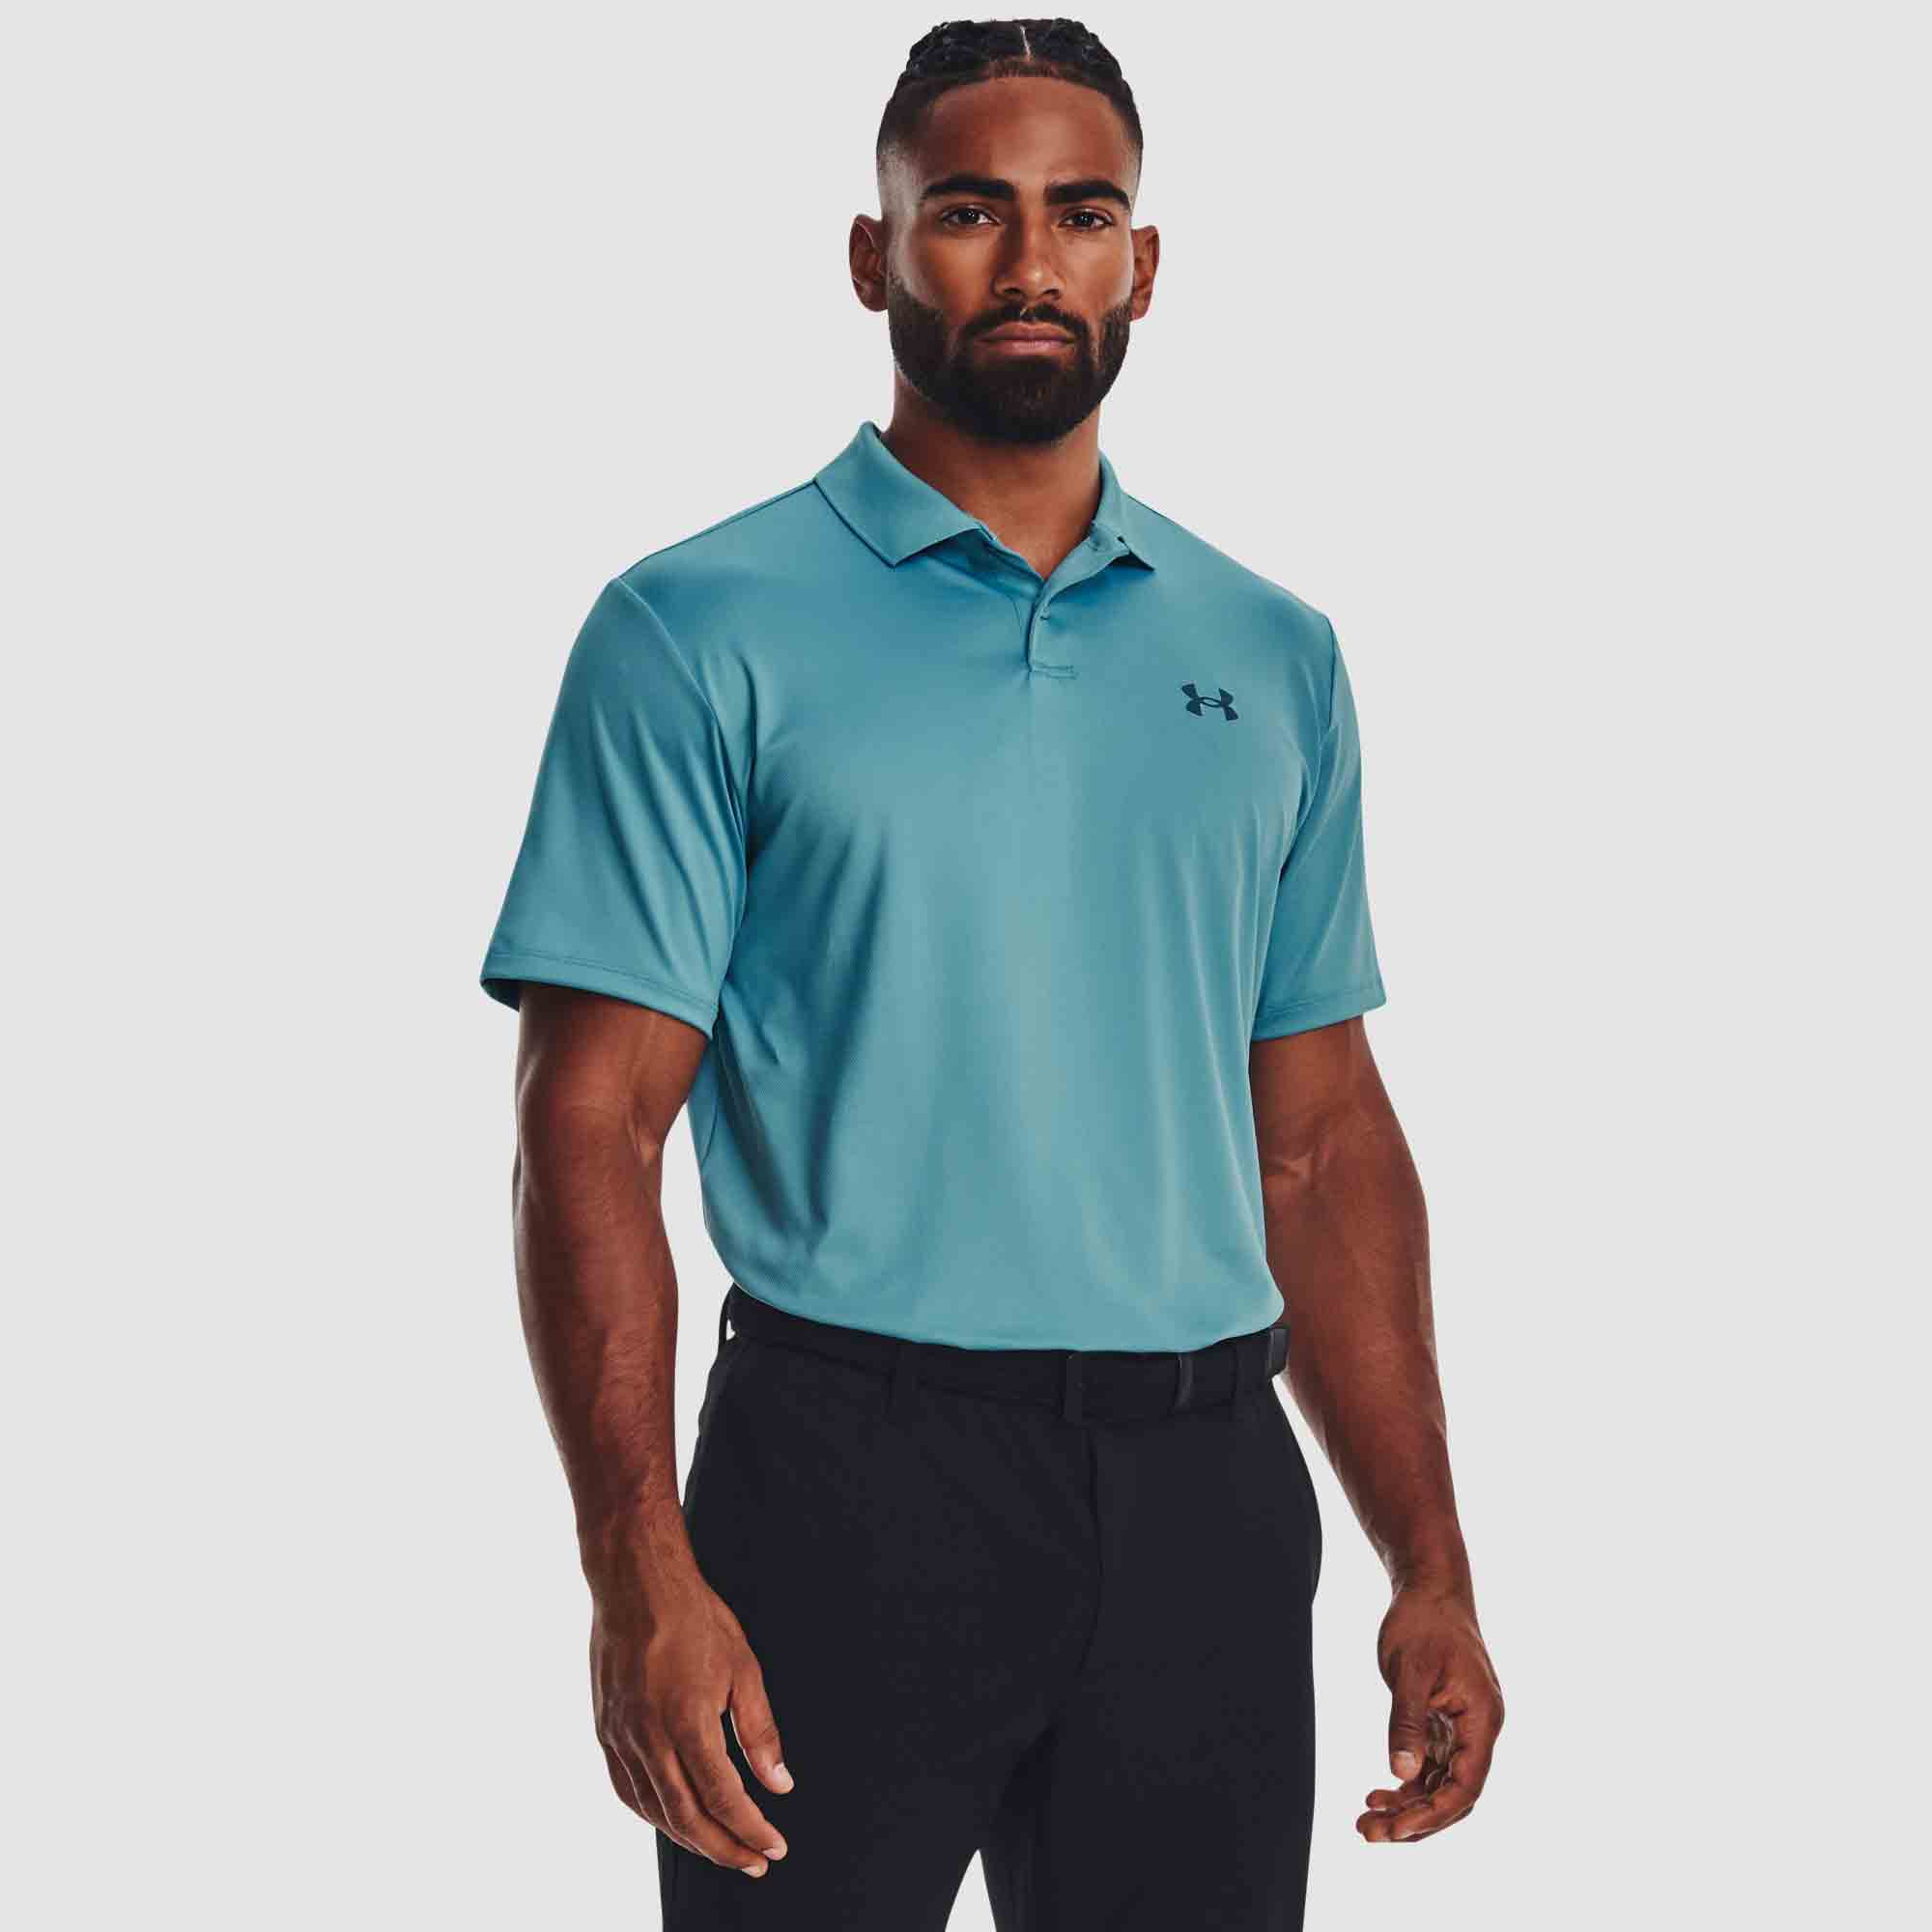 Under Armour Mens Performance 3.0 Polo | Rebel Sport